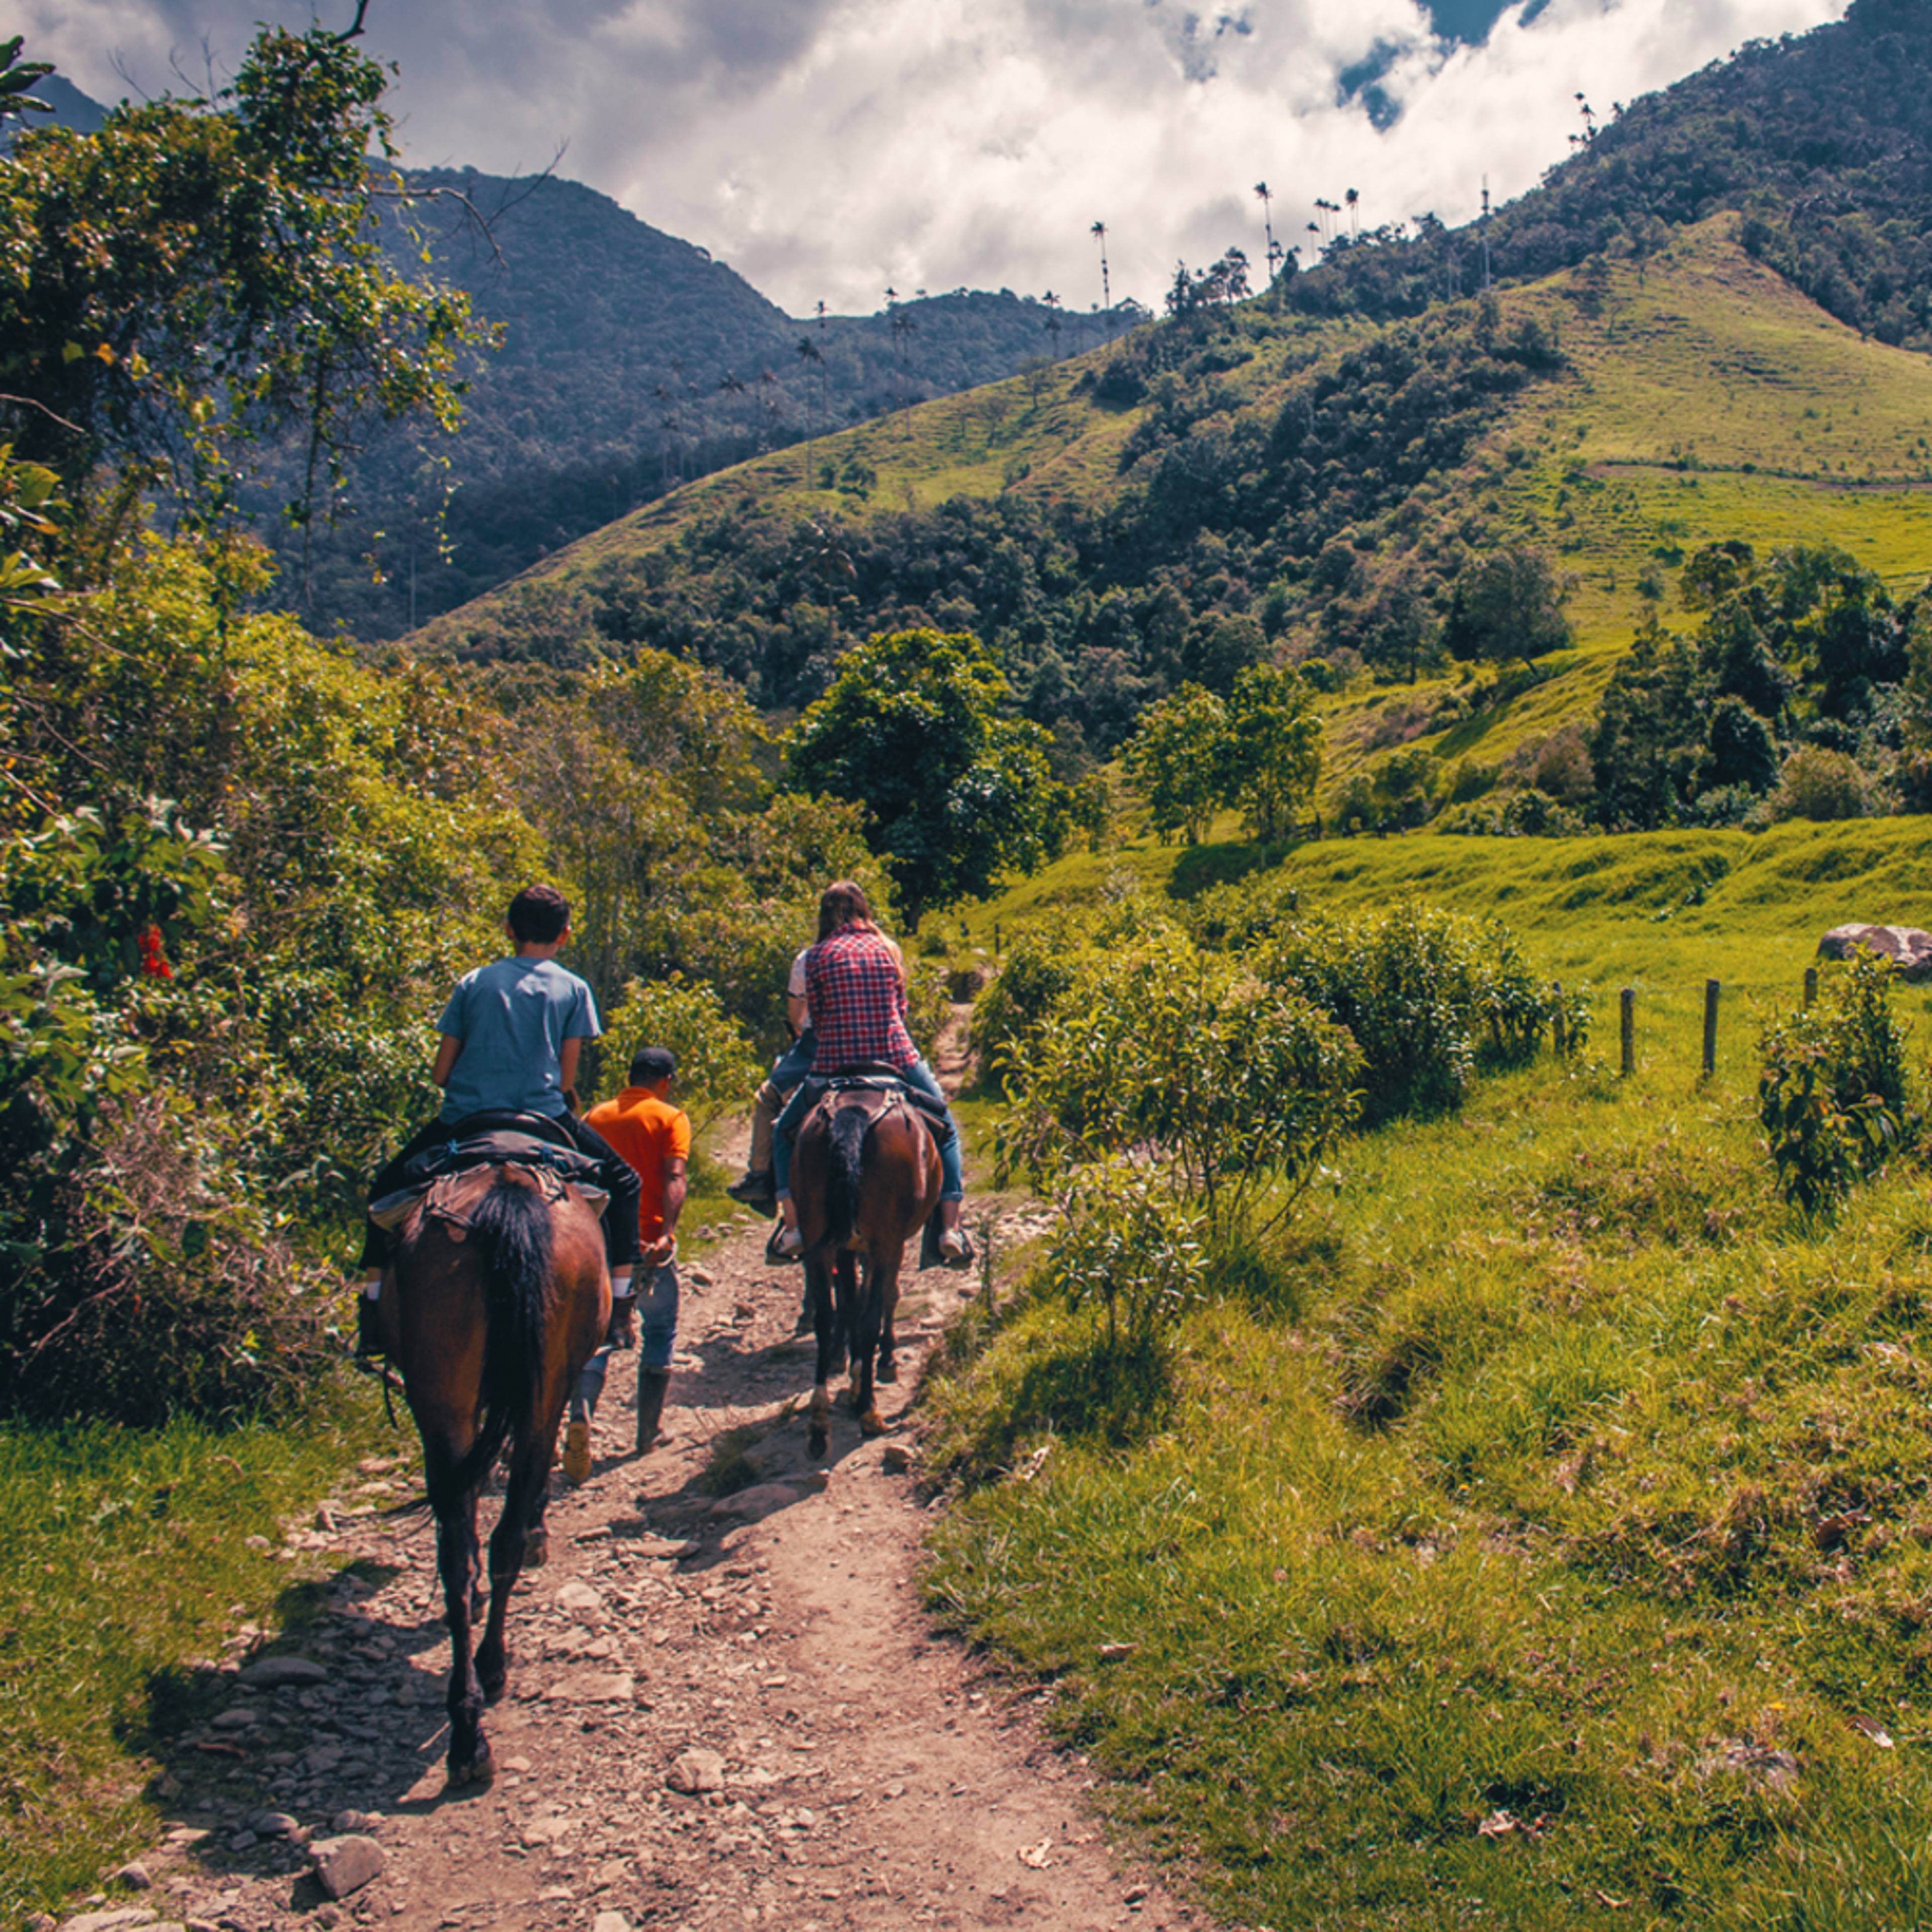 Design your horse riding tour in Costa Rica with a local expert